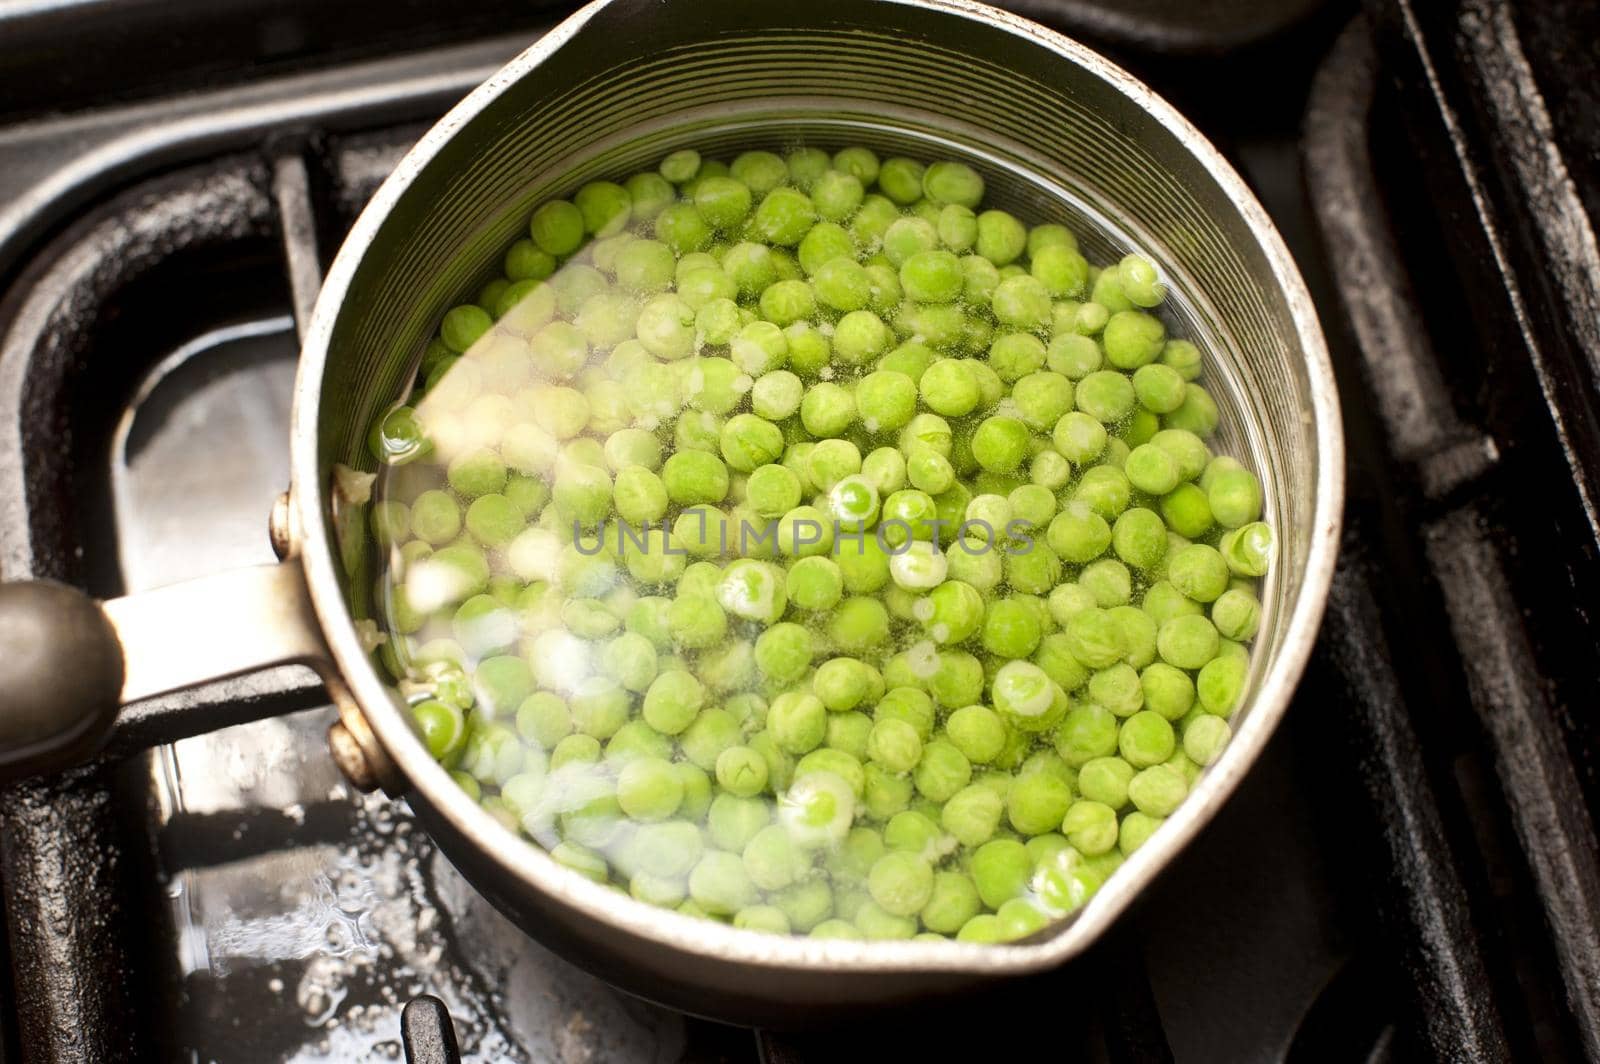 Pot of fresh green peas on the hob standing in water waiting to be cooked and boiled as an accompaniment to a meal